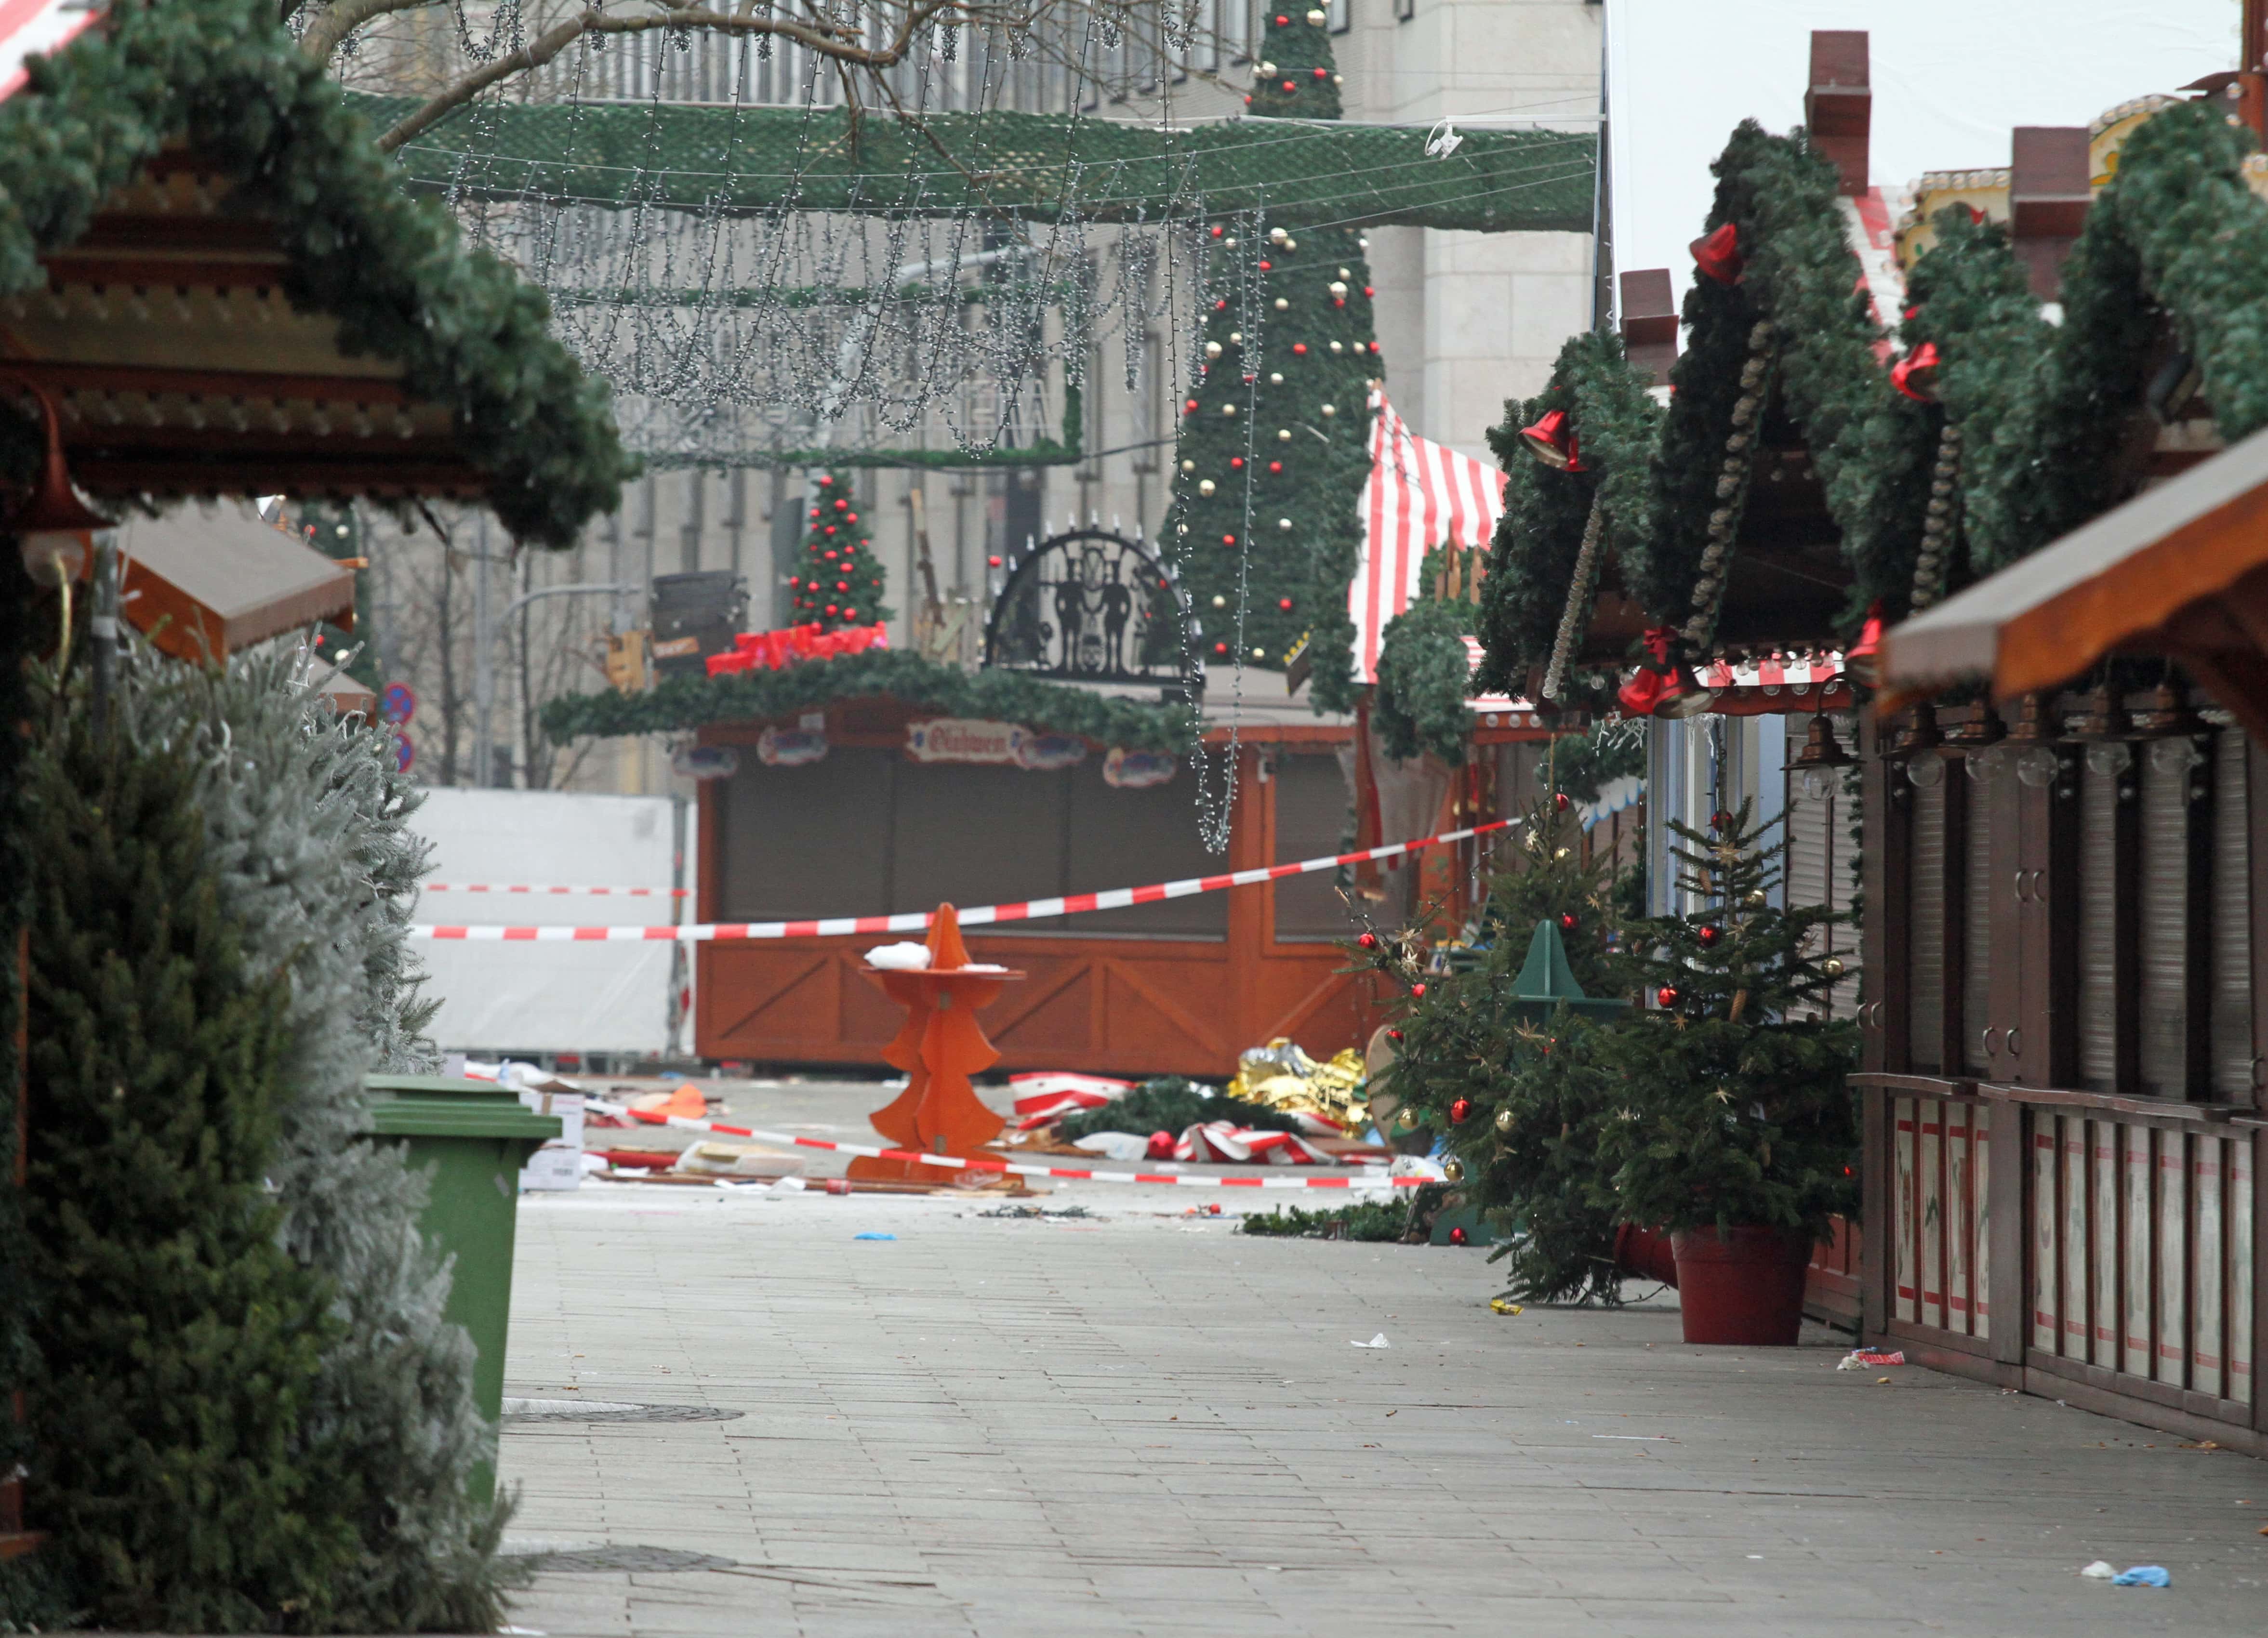 The scene in Berlin, Germany, on Dec. 20, 2016, one day after a terrorist attack at a Christmas open-air market. Credit: Andreas Trojak/Wikimedia Commons